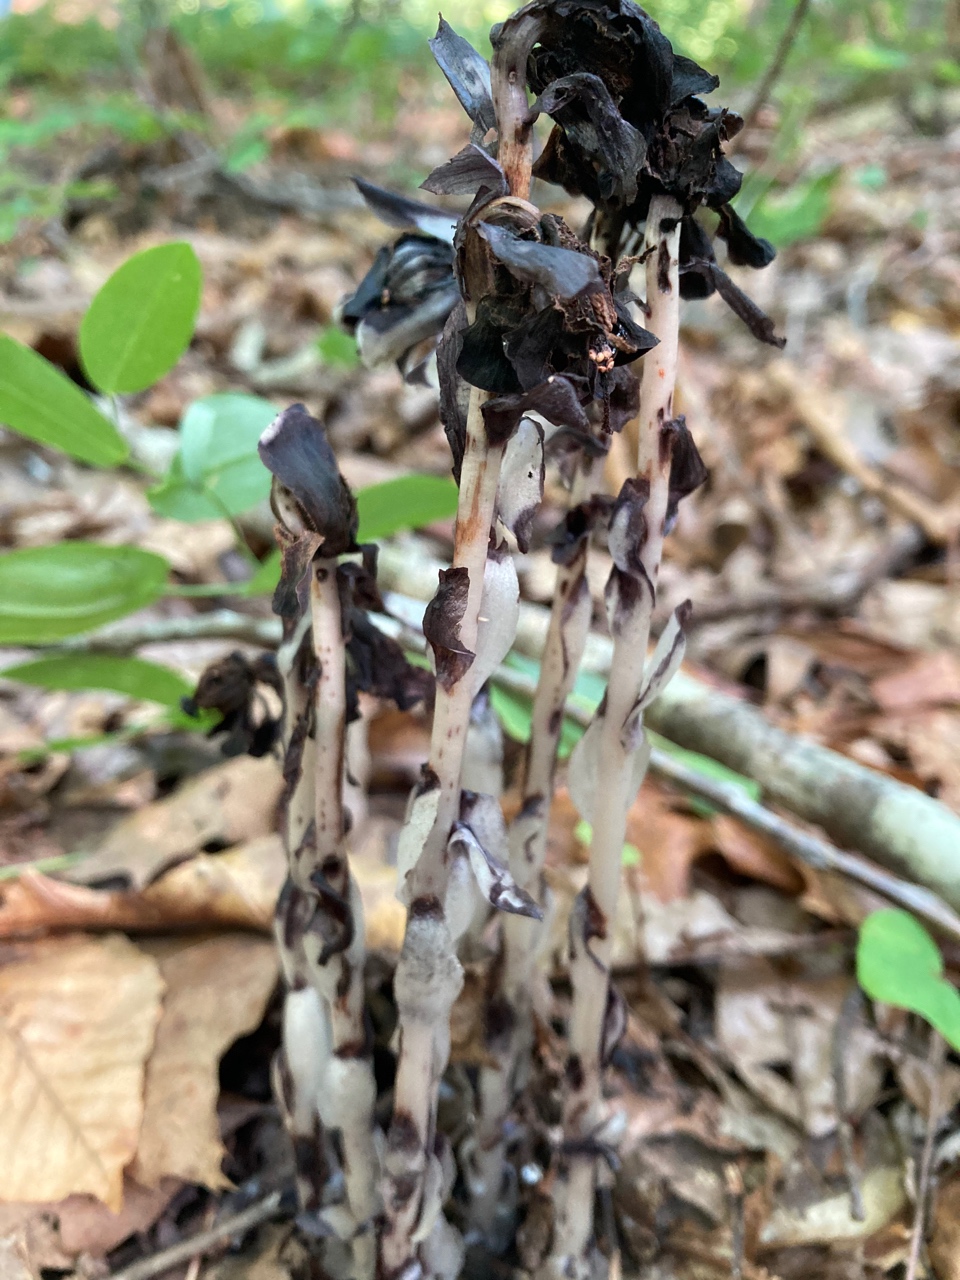 The Scientific Name is Monotropa uniflora. You will likely hear them called Indian Pipes, One-flowered Indian-pipes. This picture shows the Senescing plants turn black in color of Monotropa uniflora